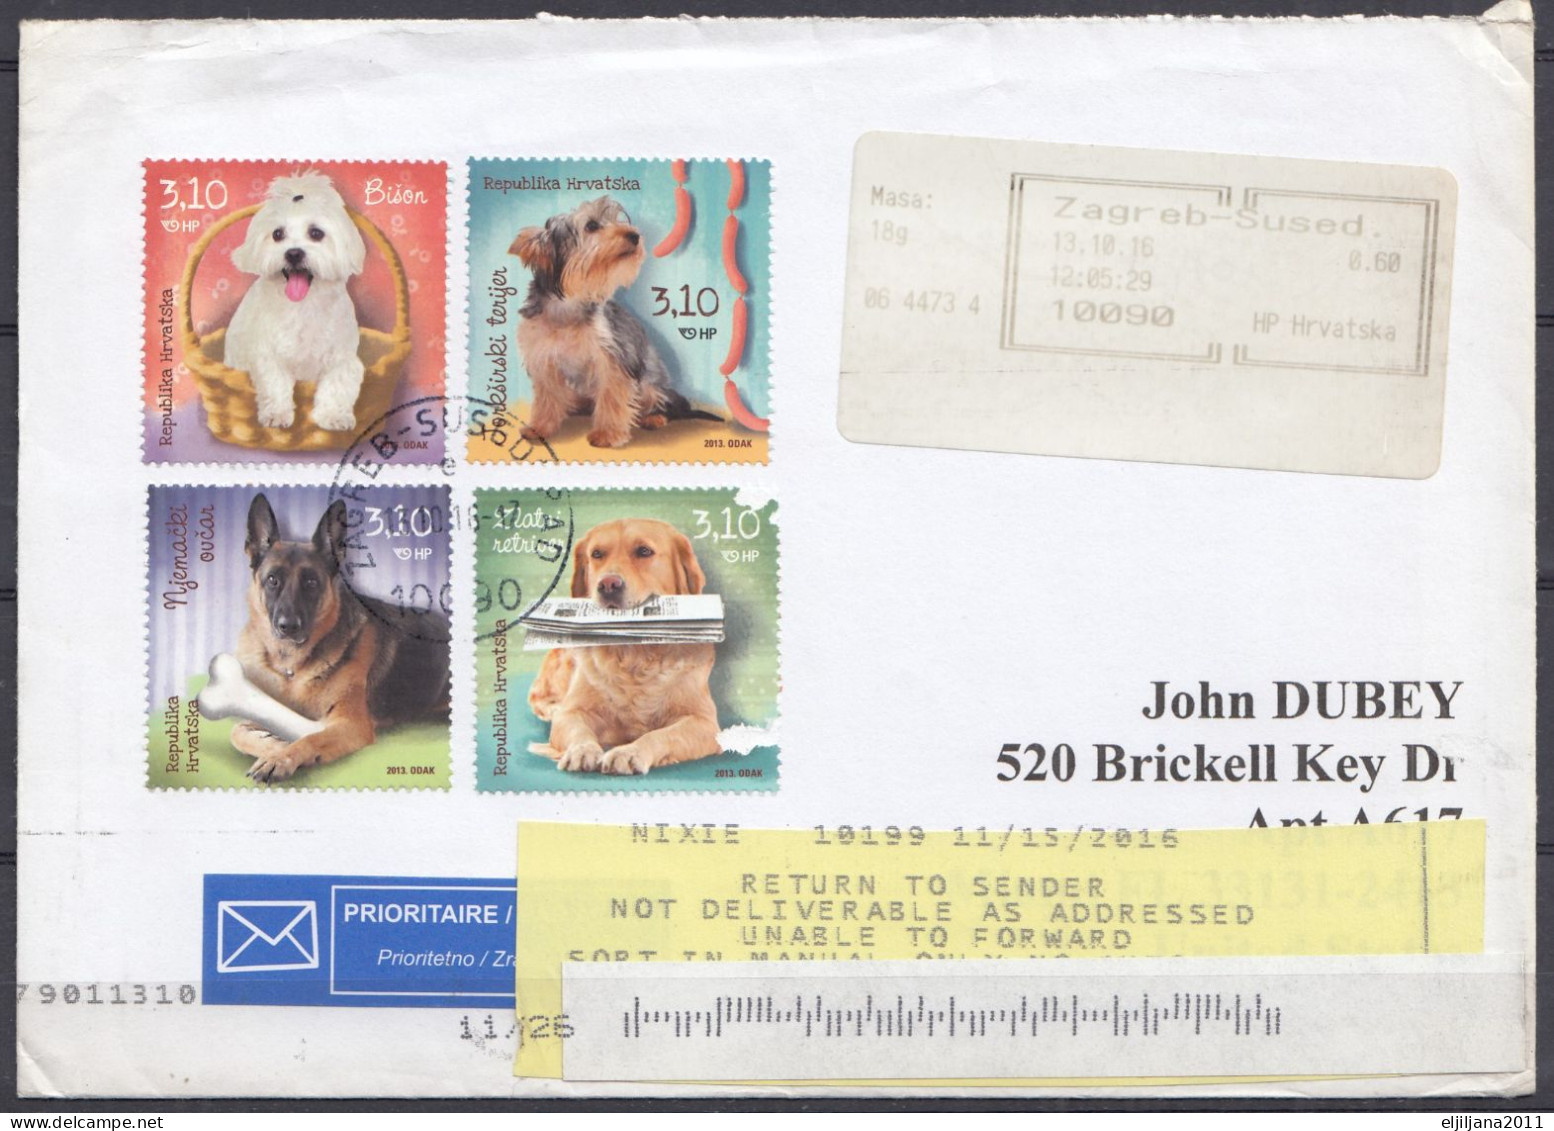 ⁕ CROATIA 2016 Hrvatska ⁕ AIRMAIL Sent To USA, Registered Shipment Returned To The Sender's Address ⁕ With Stamps Pets - Croatie